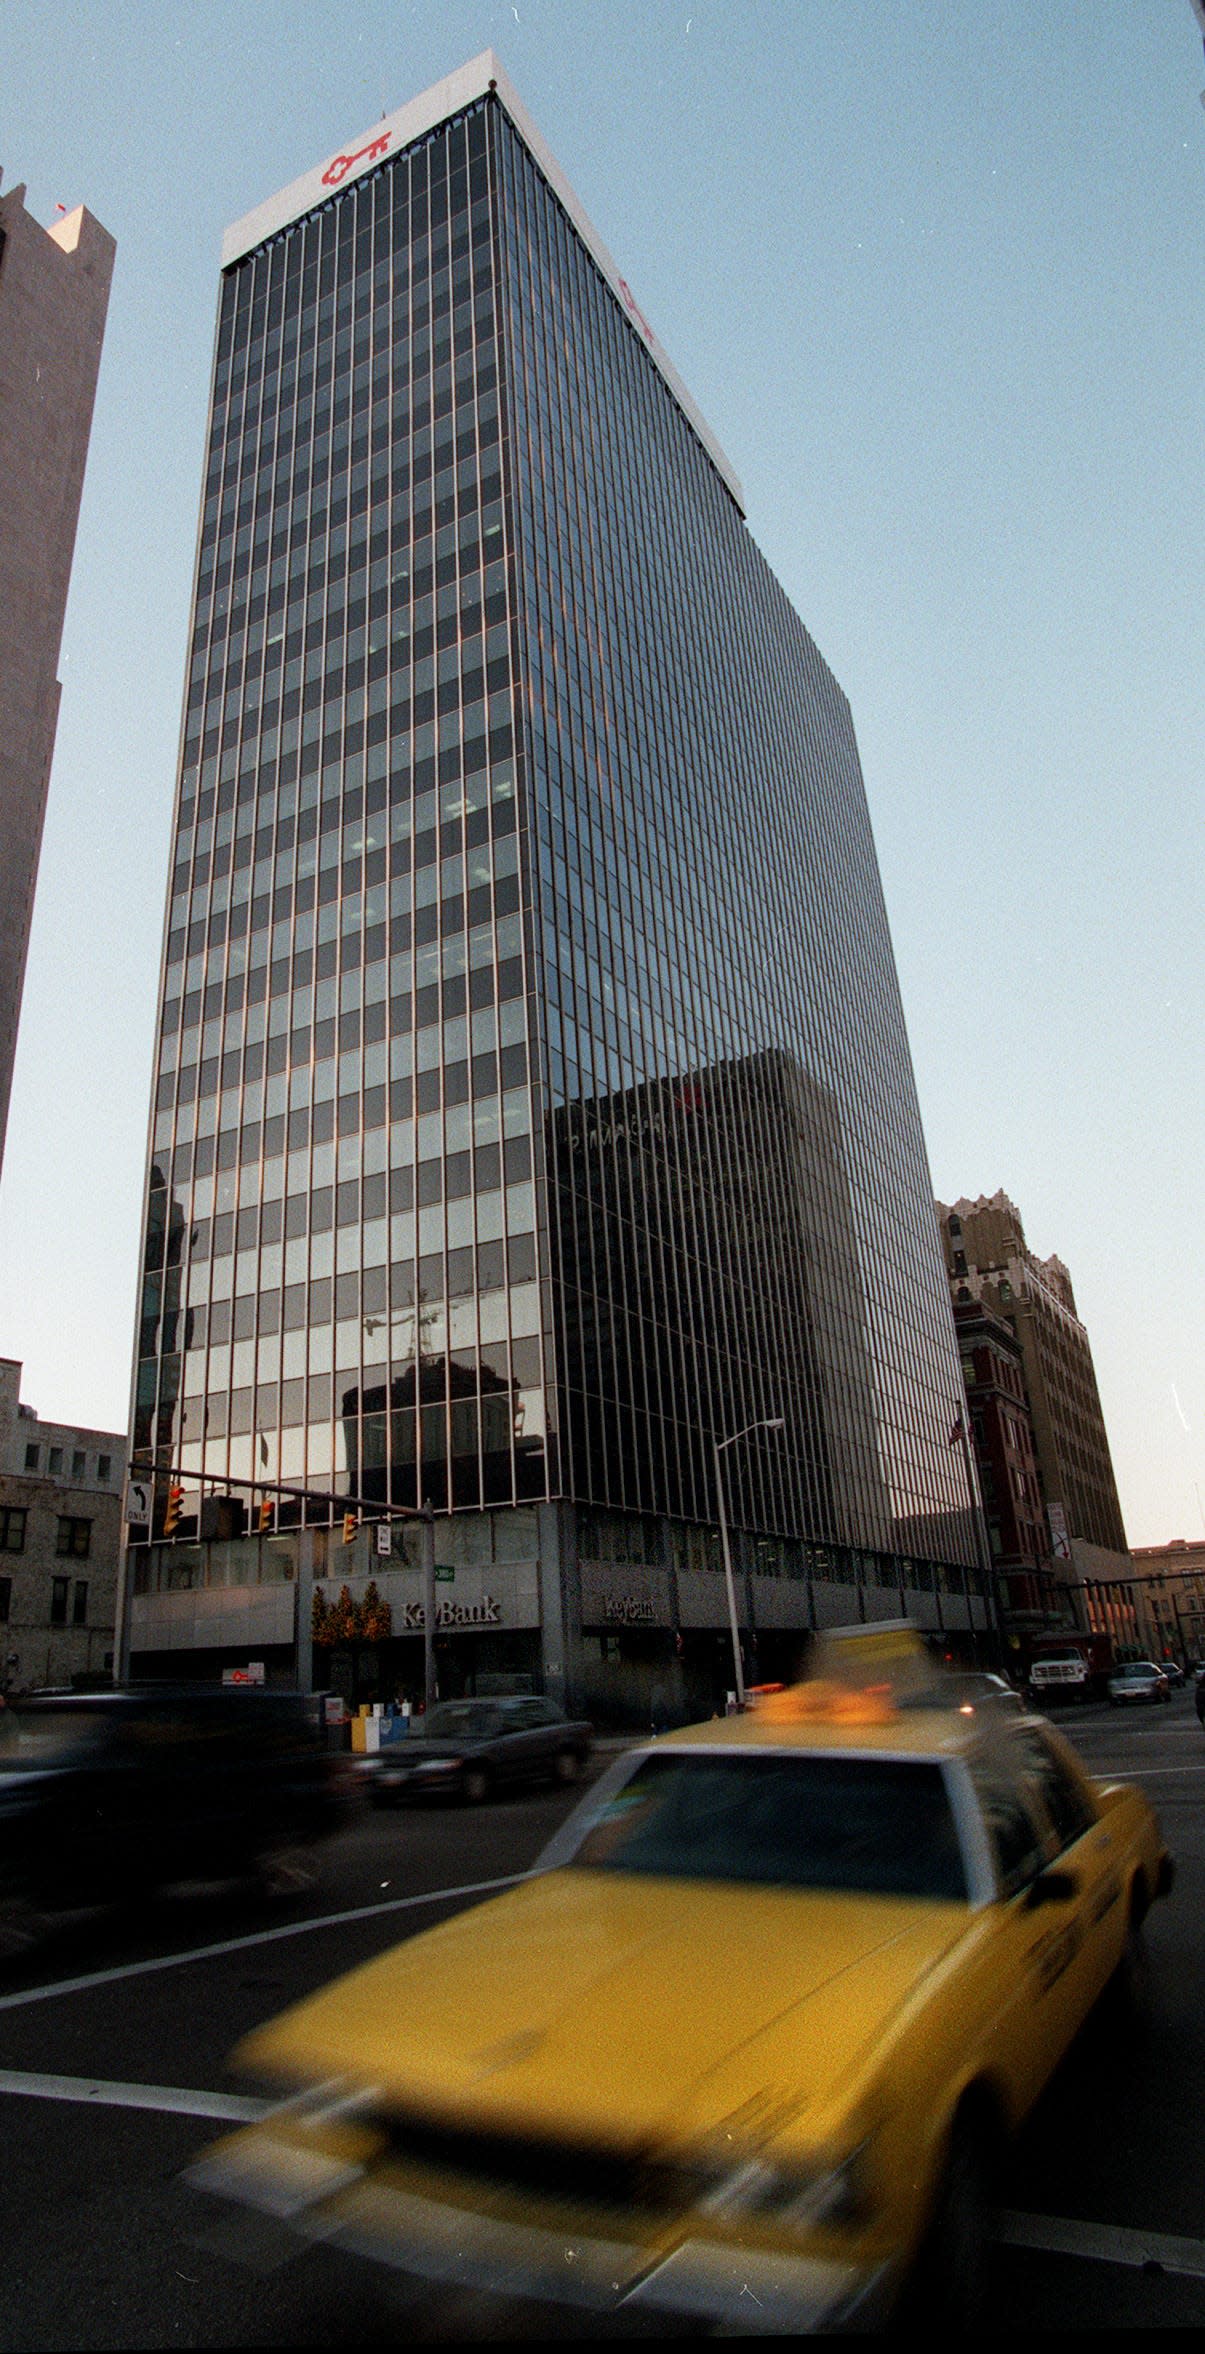 The 21-story Key Bank building, shown here in 1997, was built in 1964.